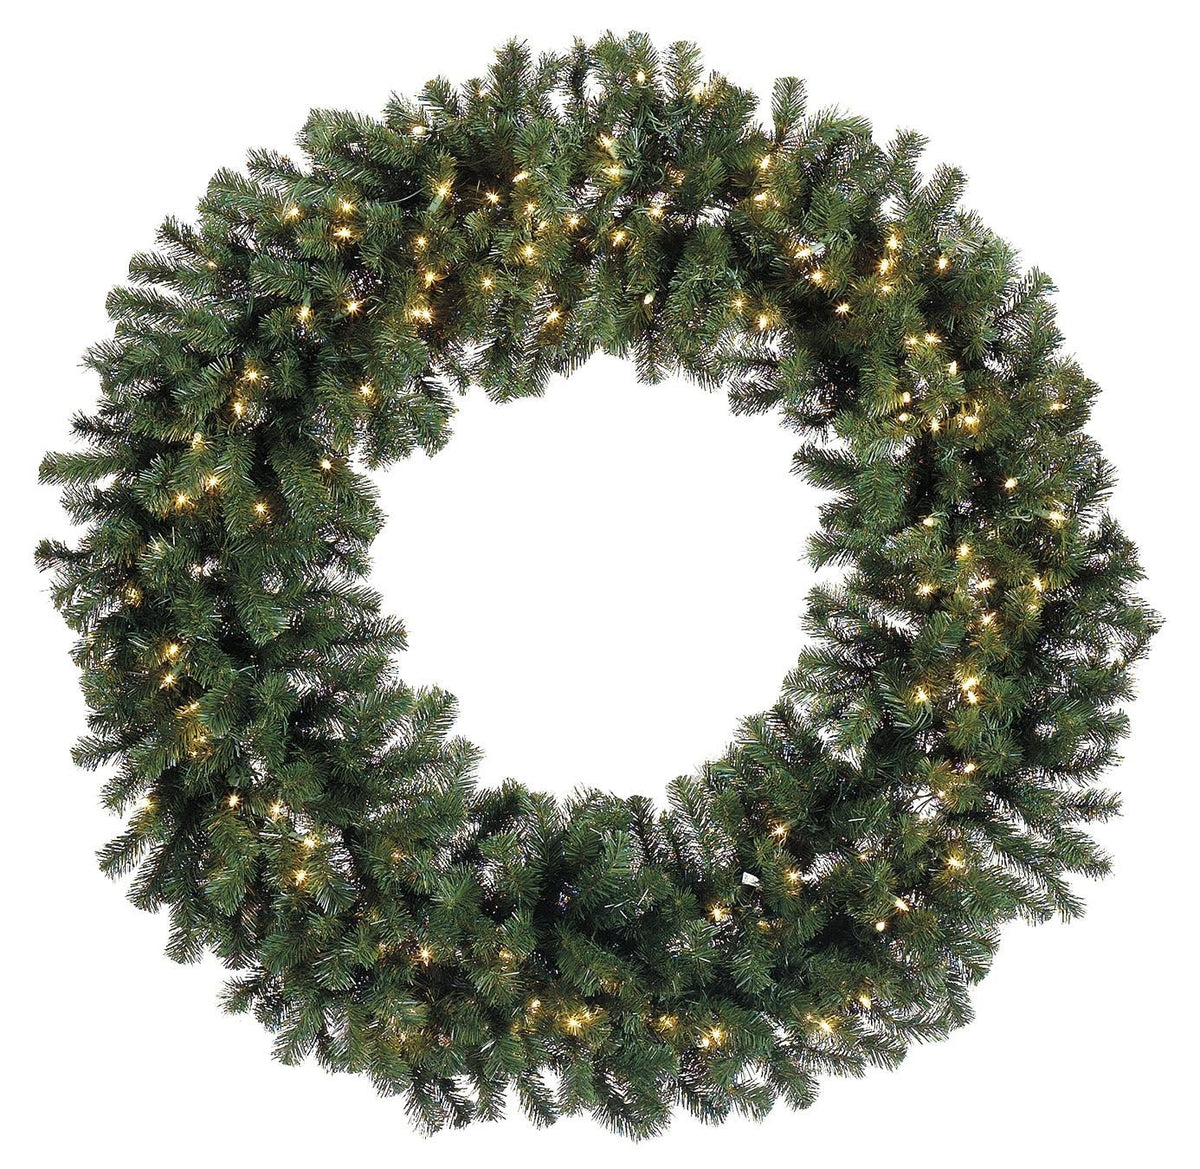 72" Deluxe Windsor Wreath W/ LED Lights - Holiday Warehouse